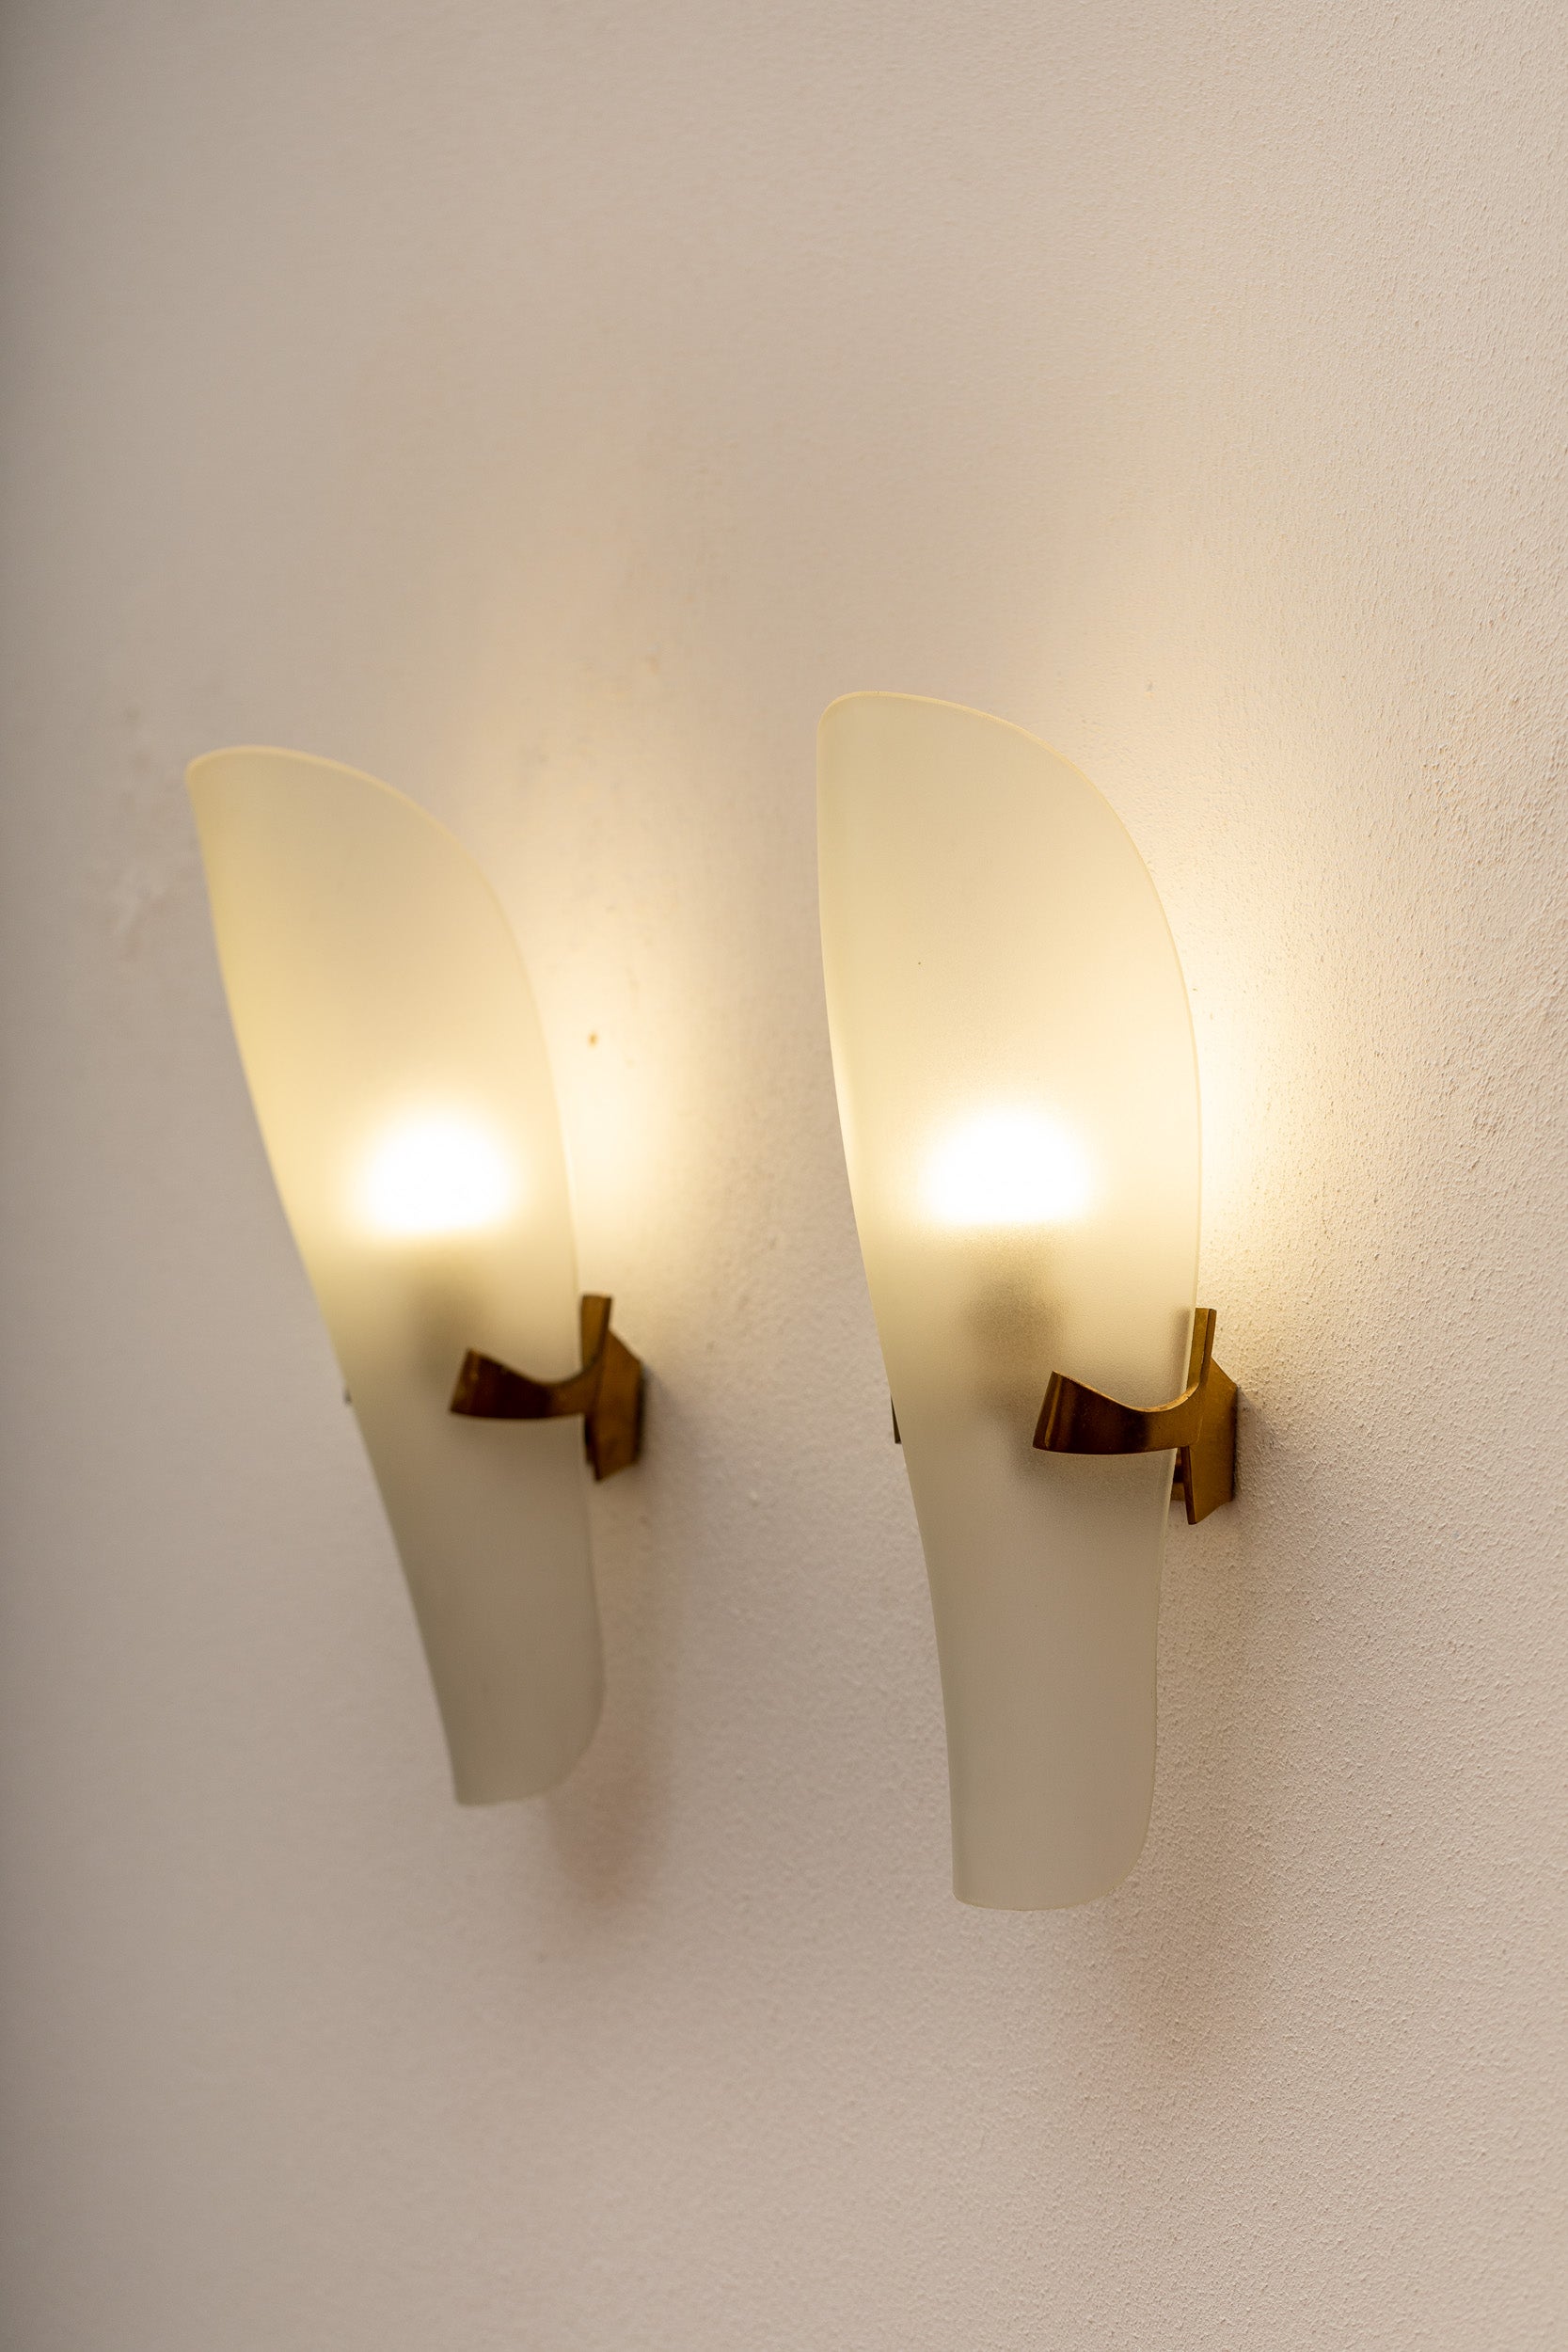 Stunning Max Ingrand wall lights for Fontana Arte, mod. 1636 
Bib. Quaderni di Fontana Arte, pag. 64

They were in important space in Italy.

Original shade, brass structure and sockets.